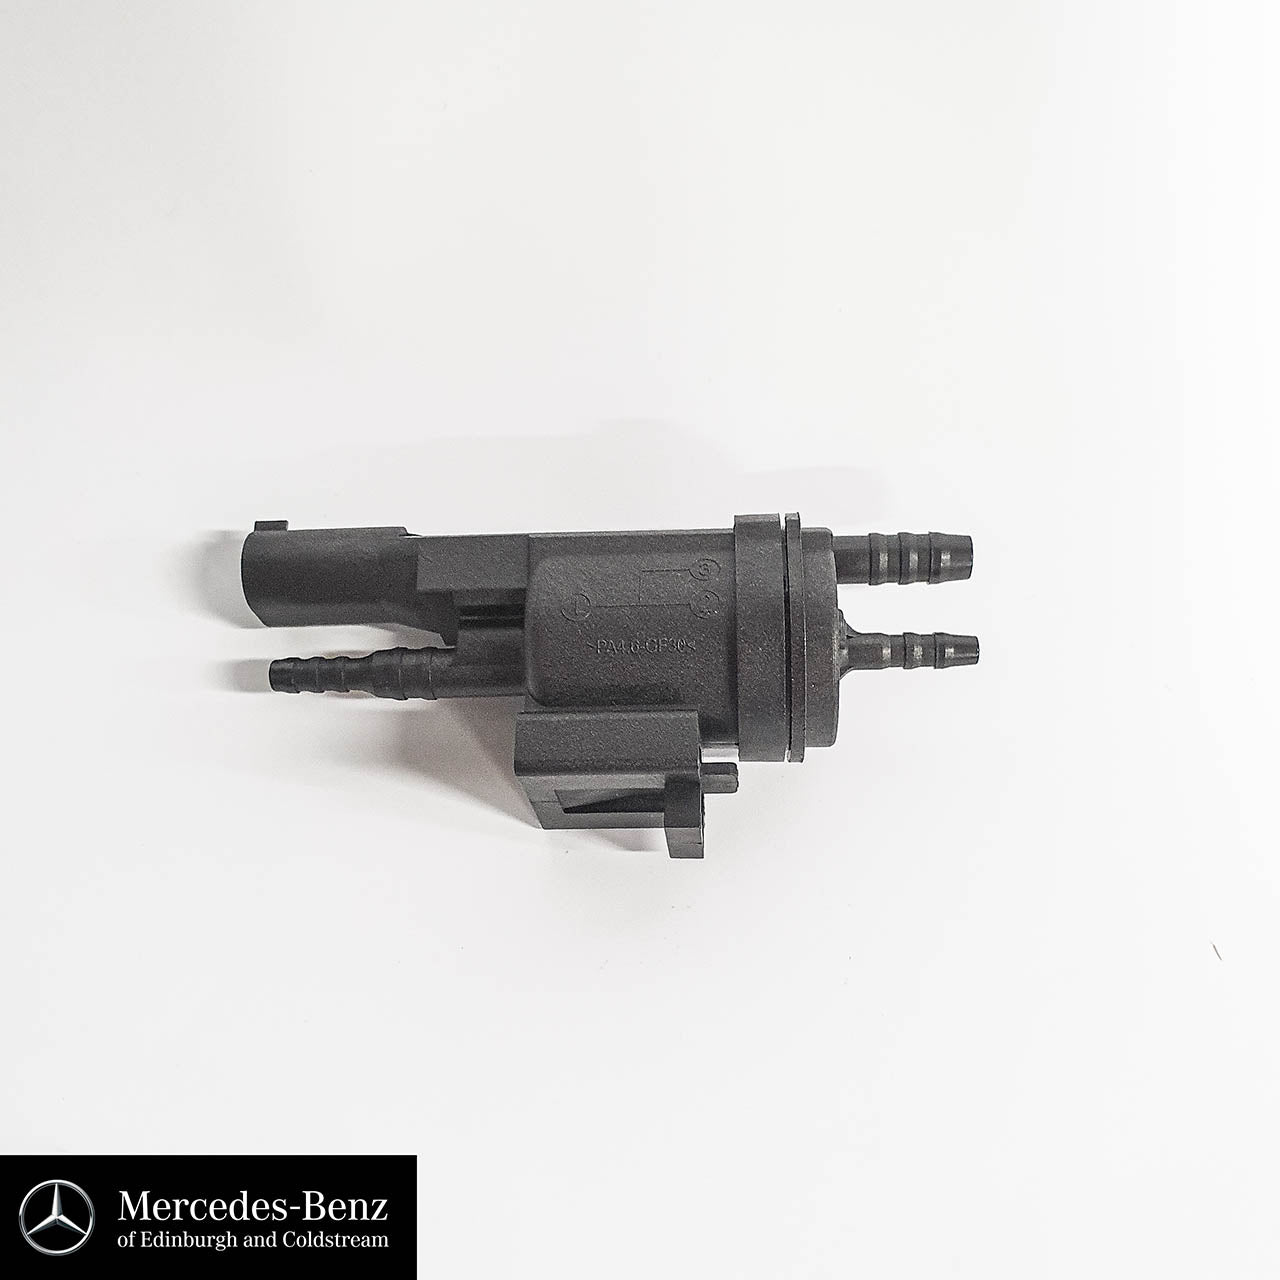 Switchover valve A0005003201 various car models - petrol and diesel